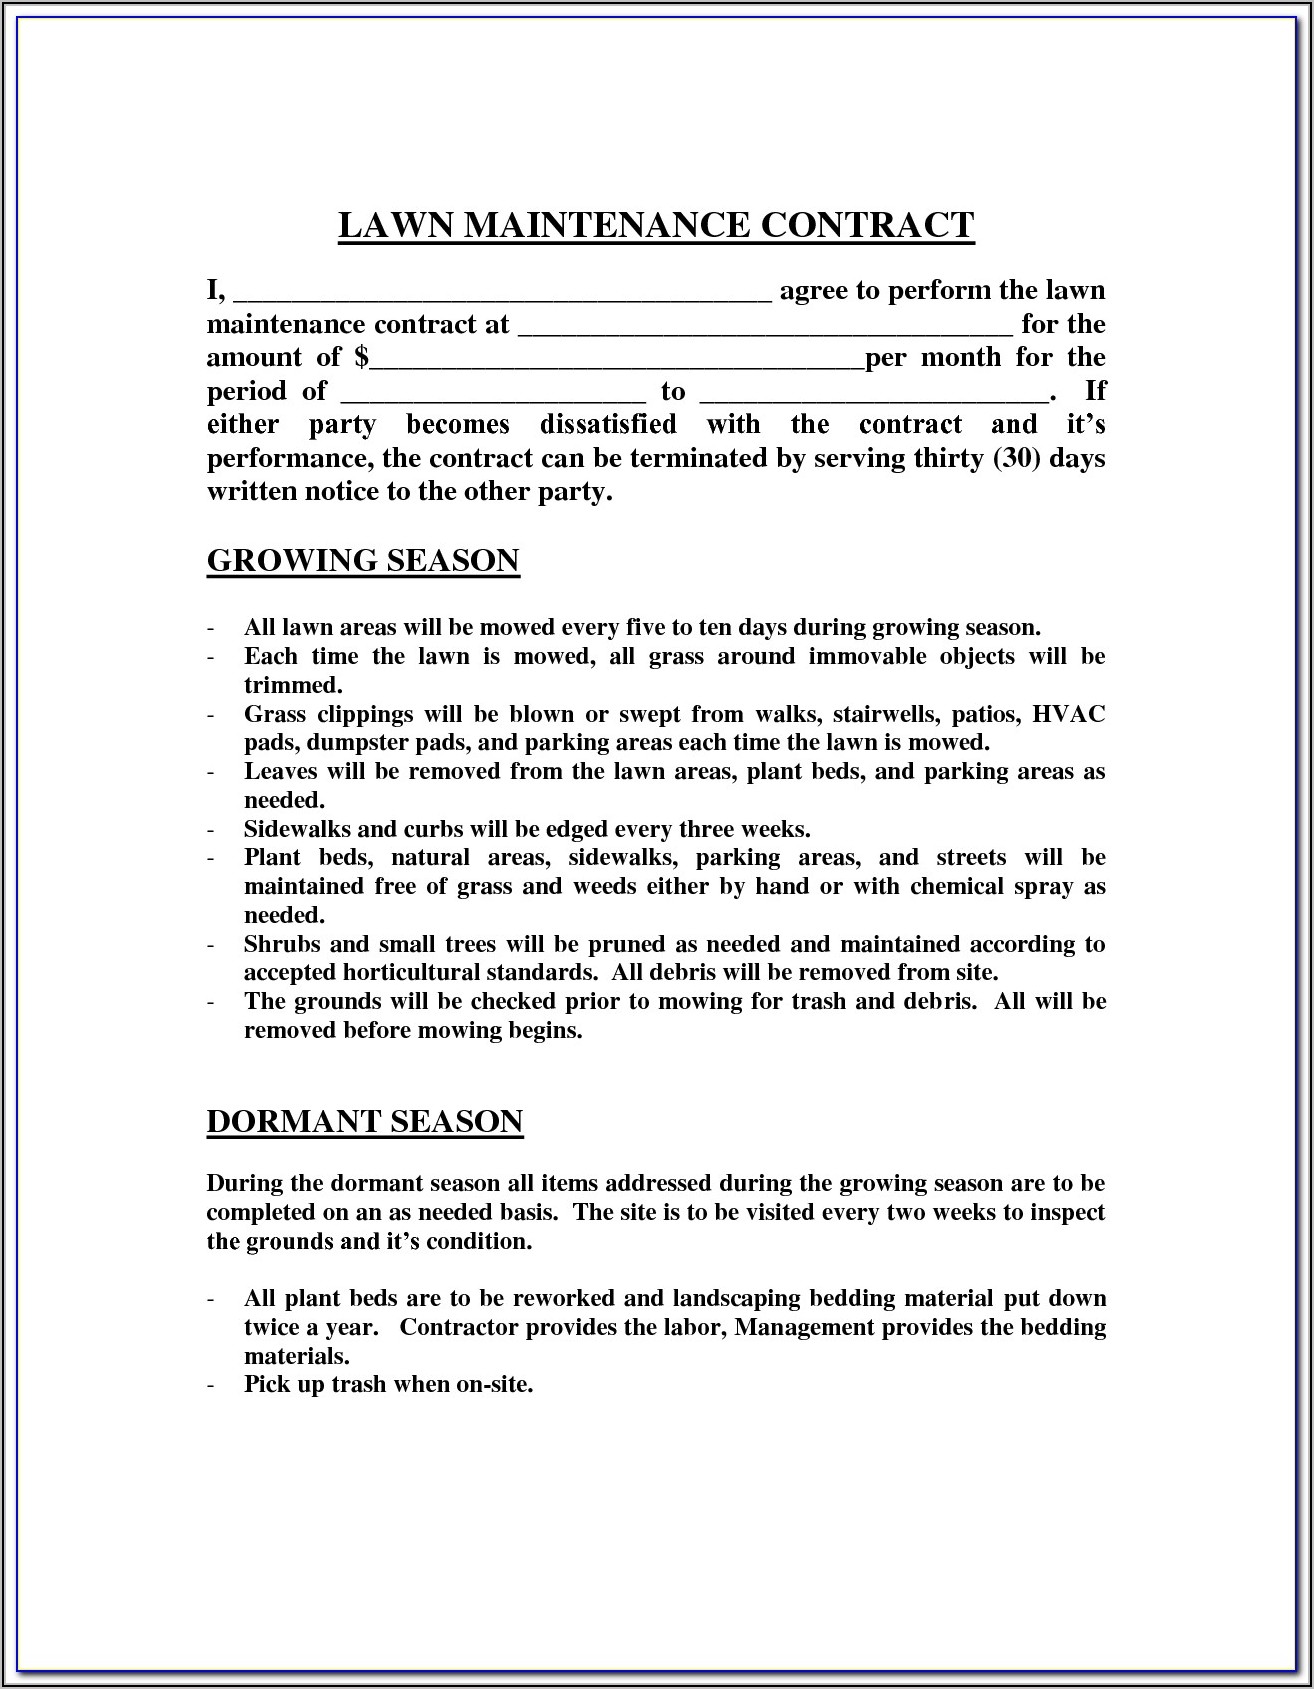 Lawn Maintenance Contract Examples